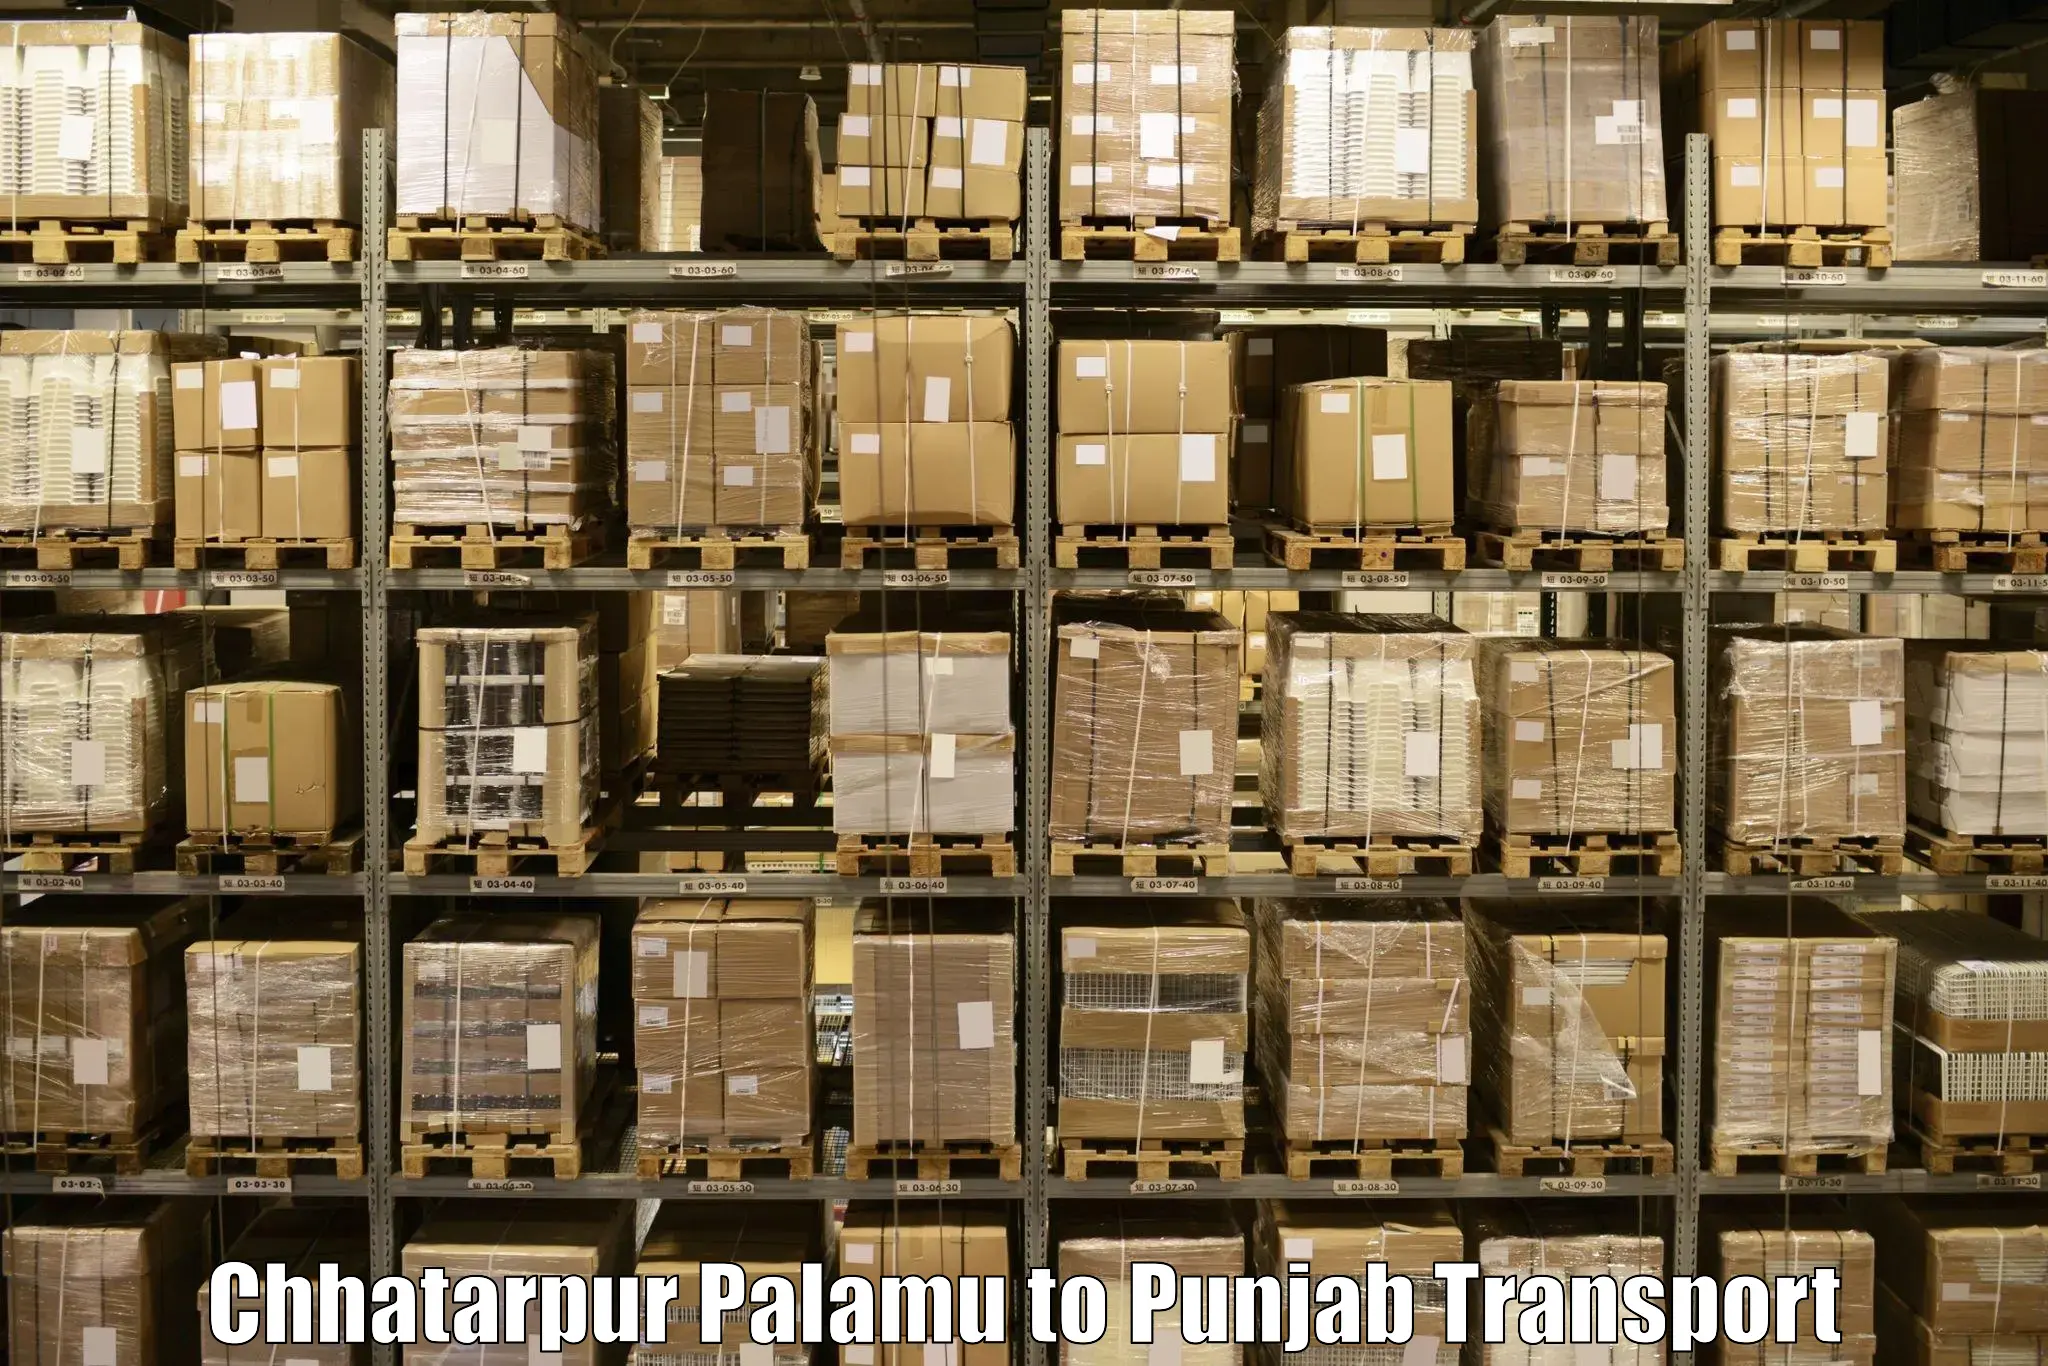 Package delivery services Chhatarpur Palamu to Faridkot